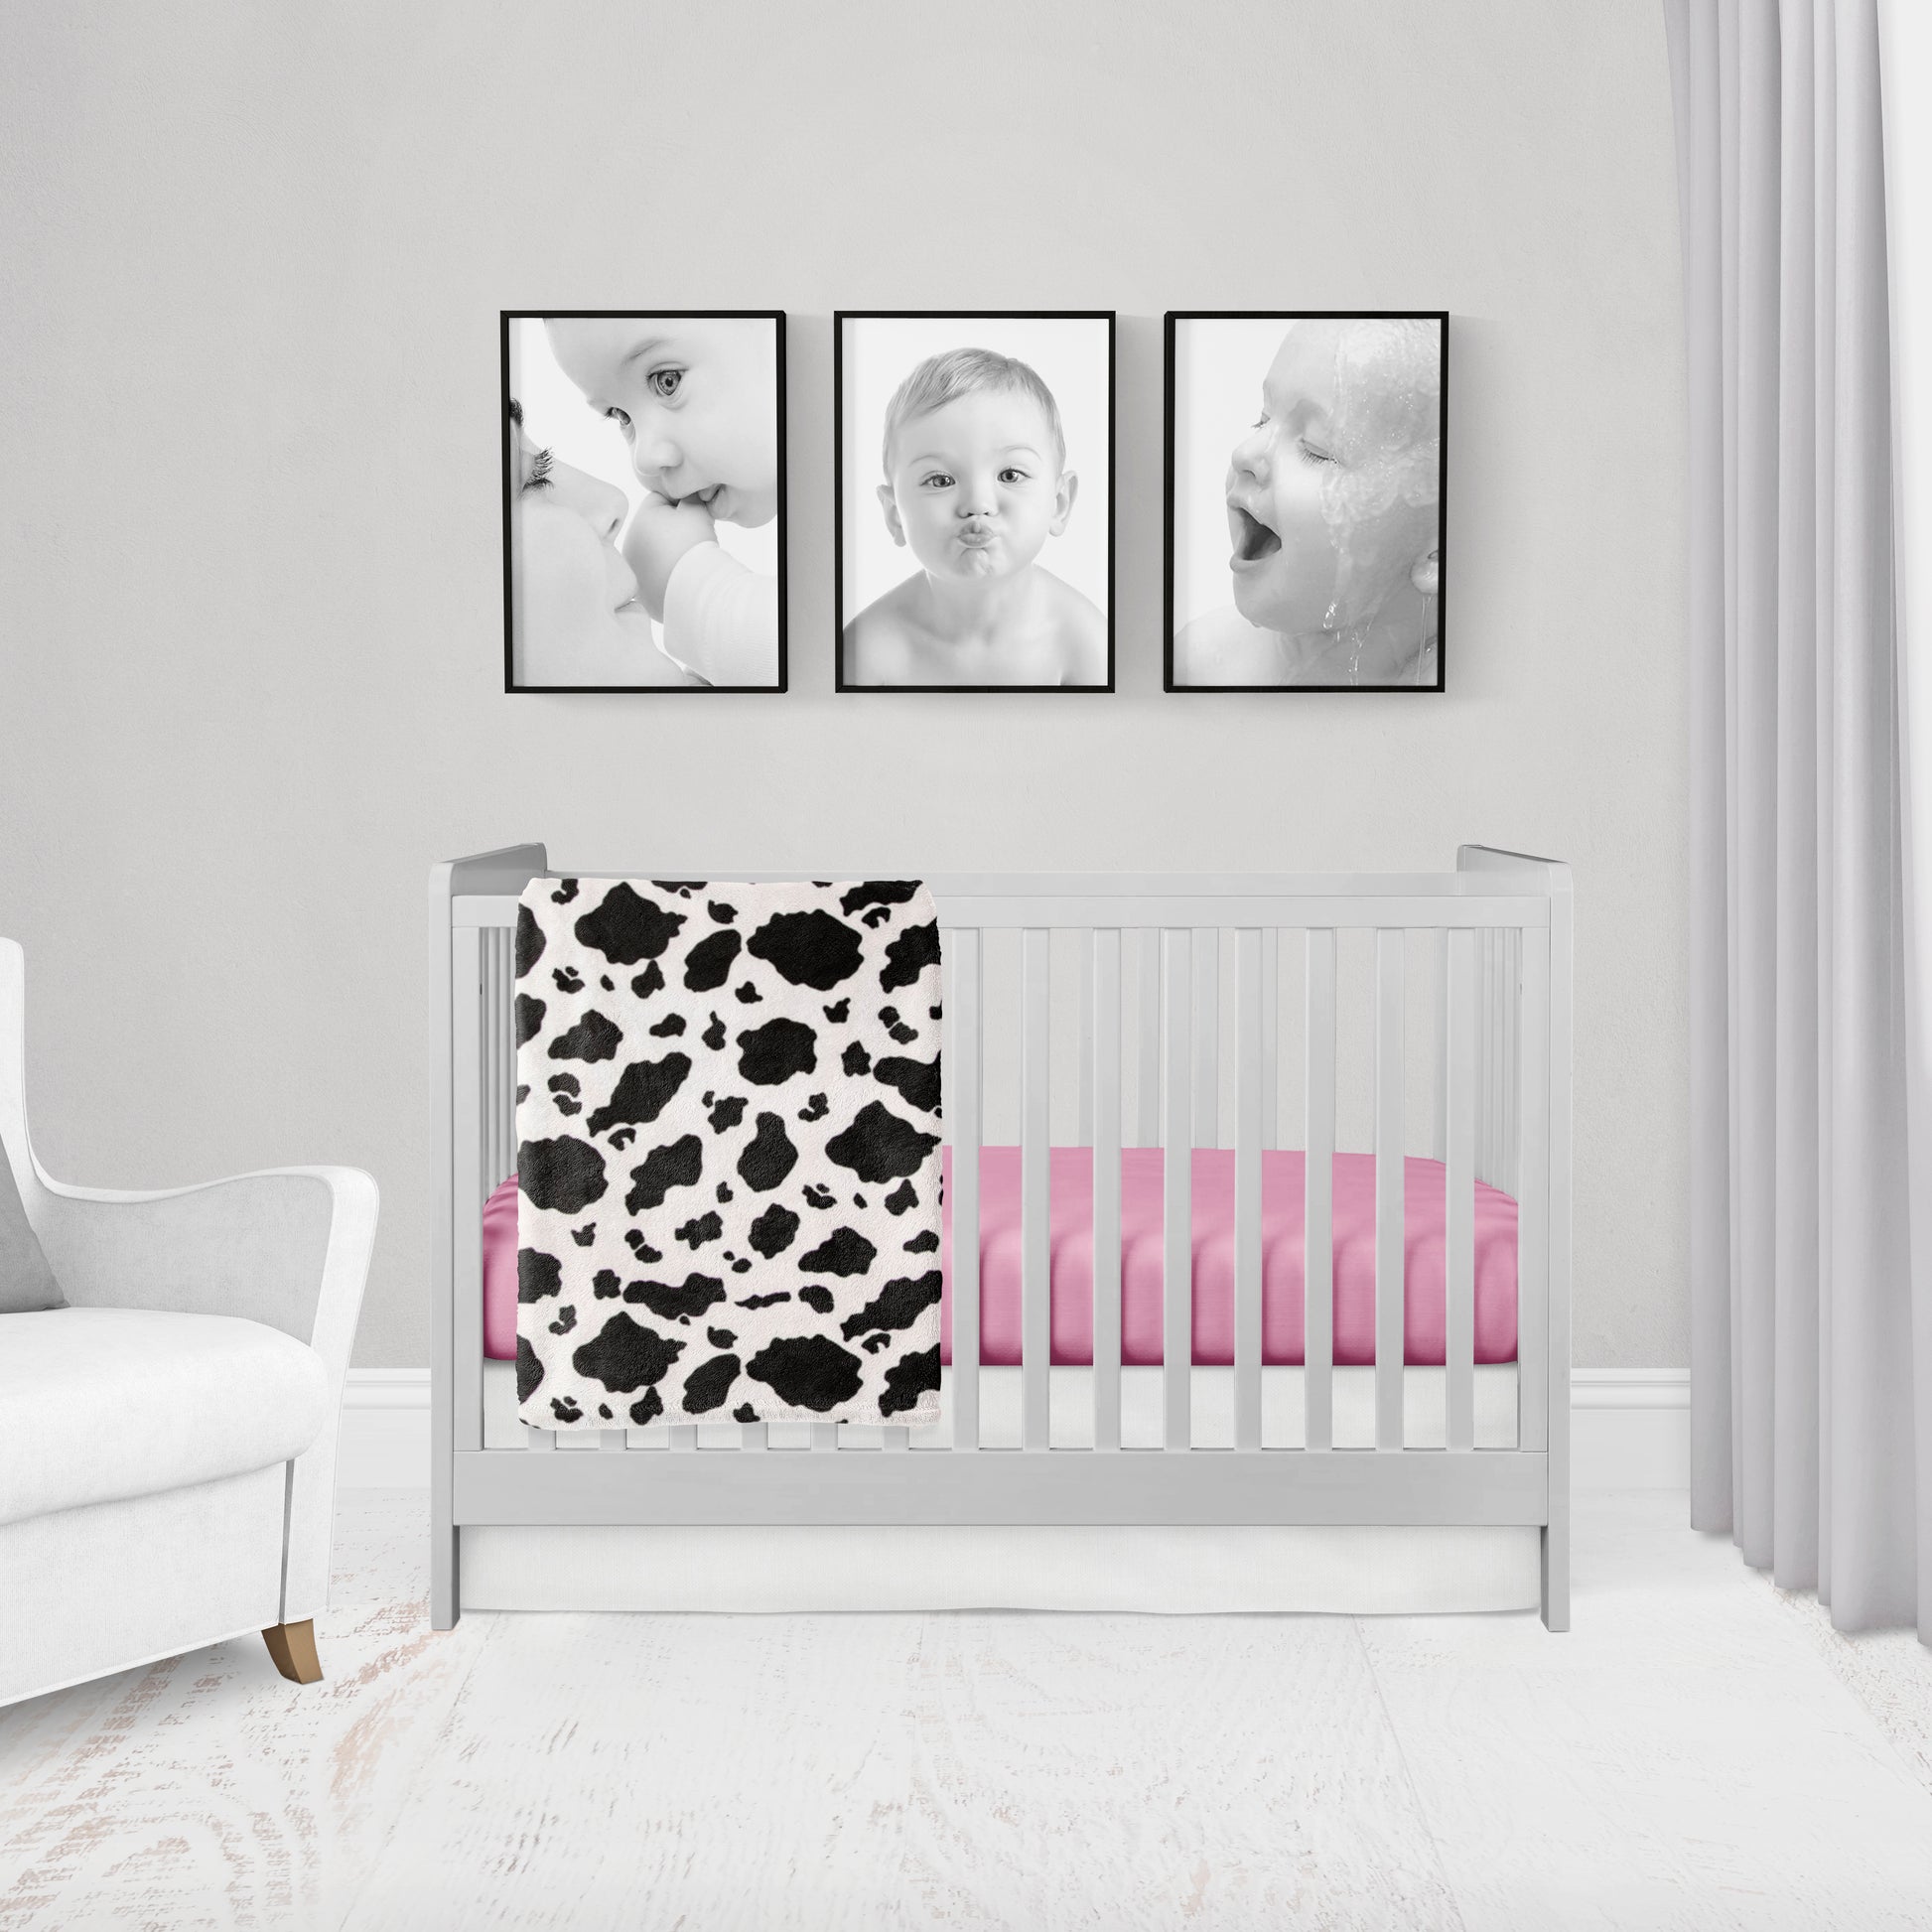 cow cotton or minky blanket & pink crib sheet